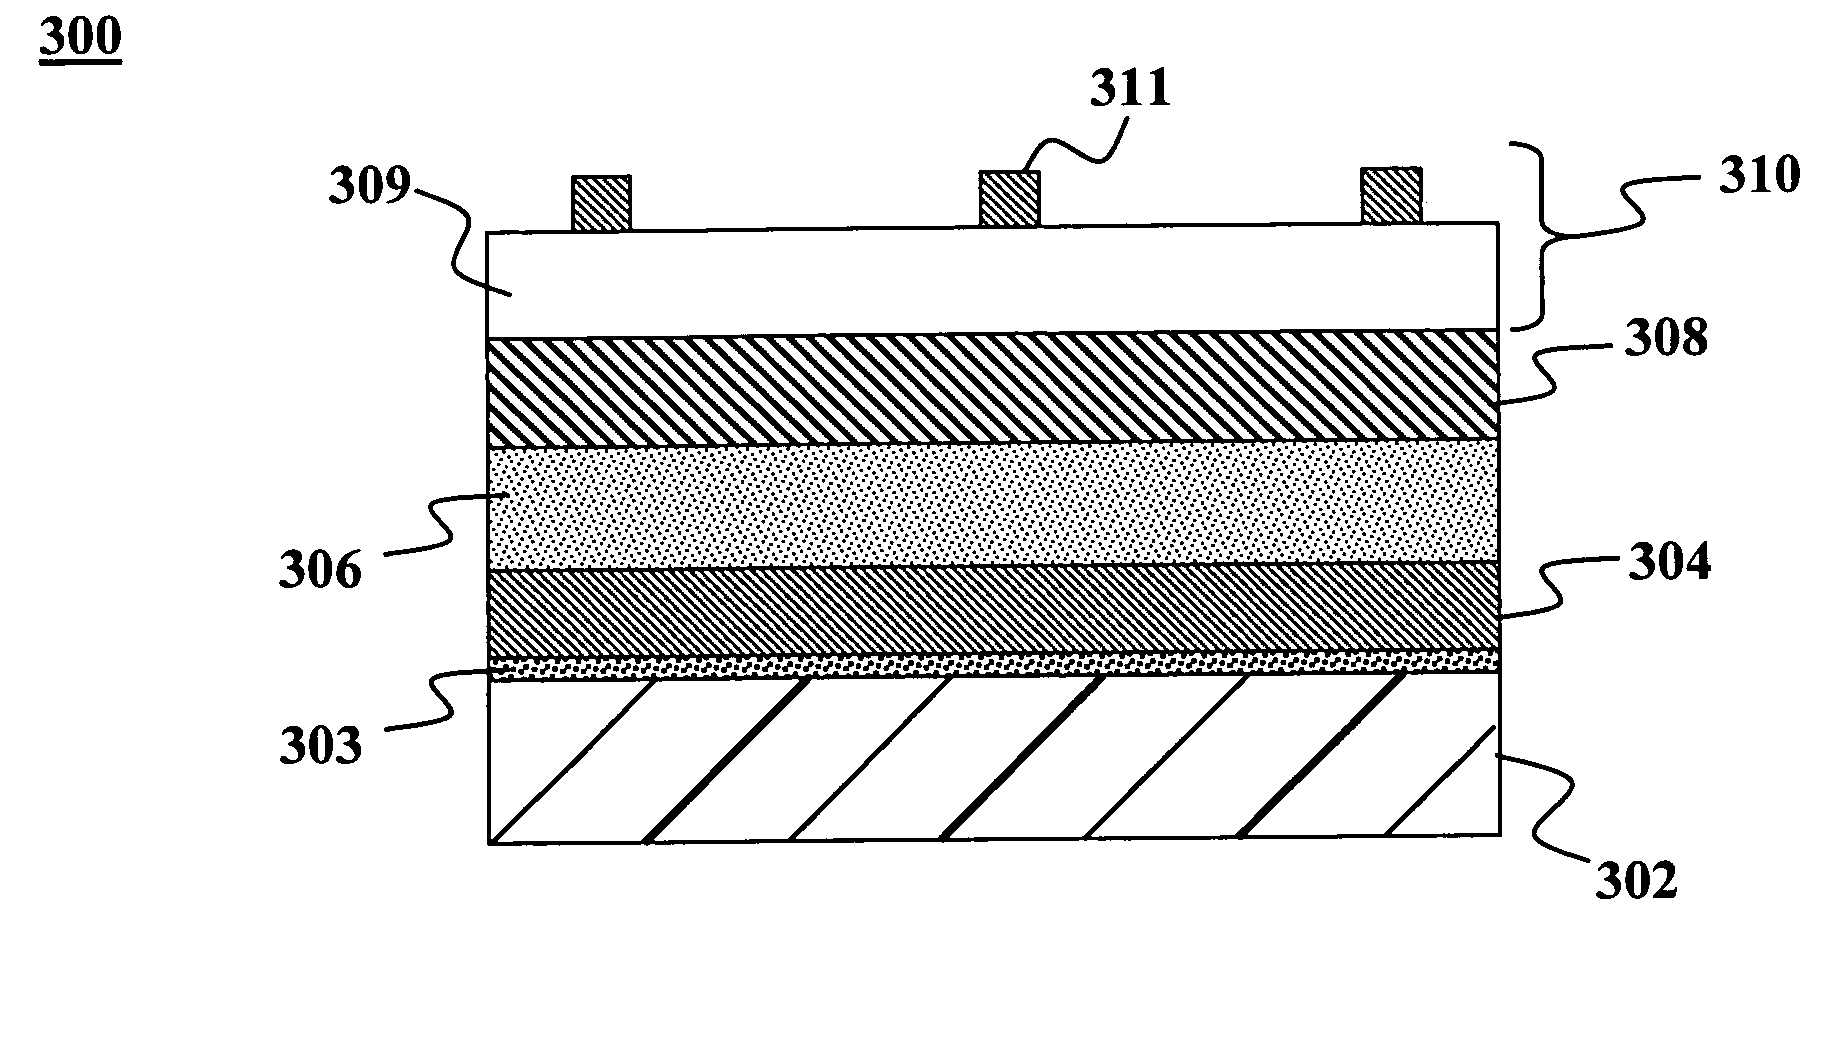 Formation of compound film for photovoltaic device